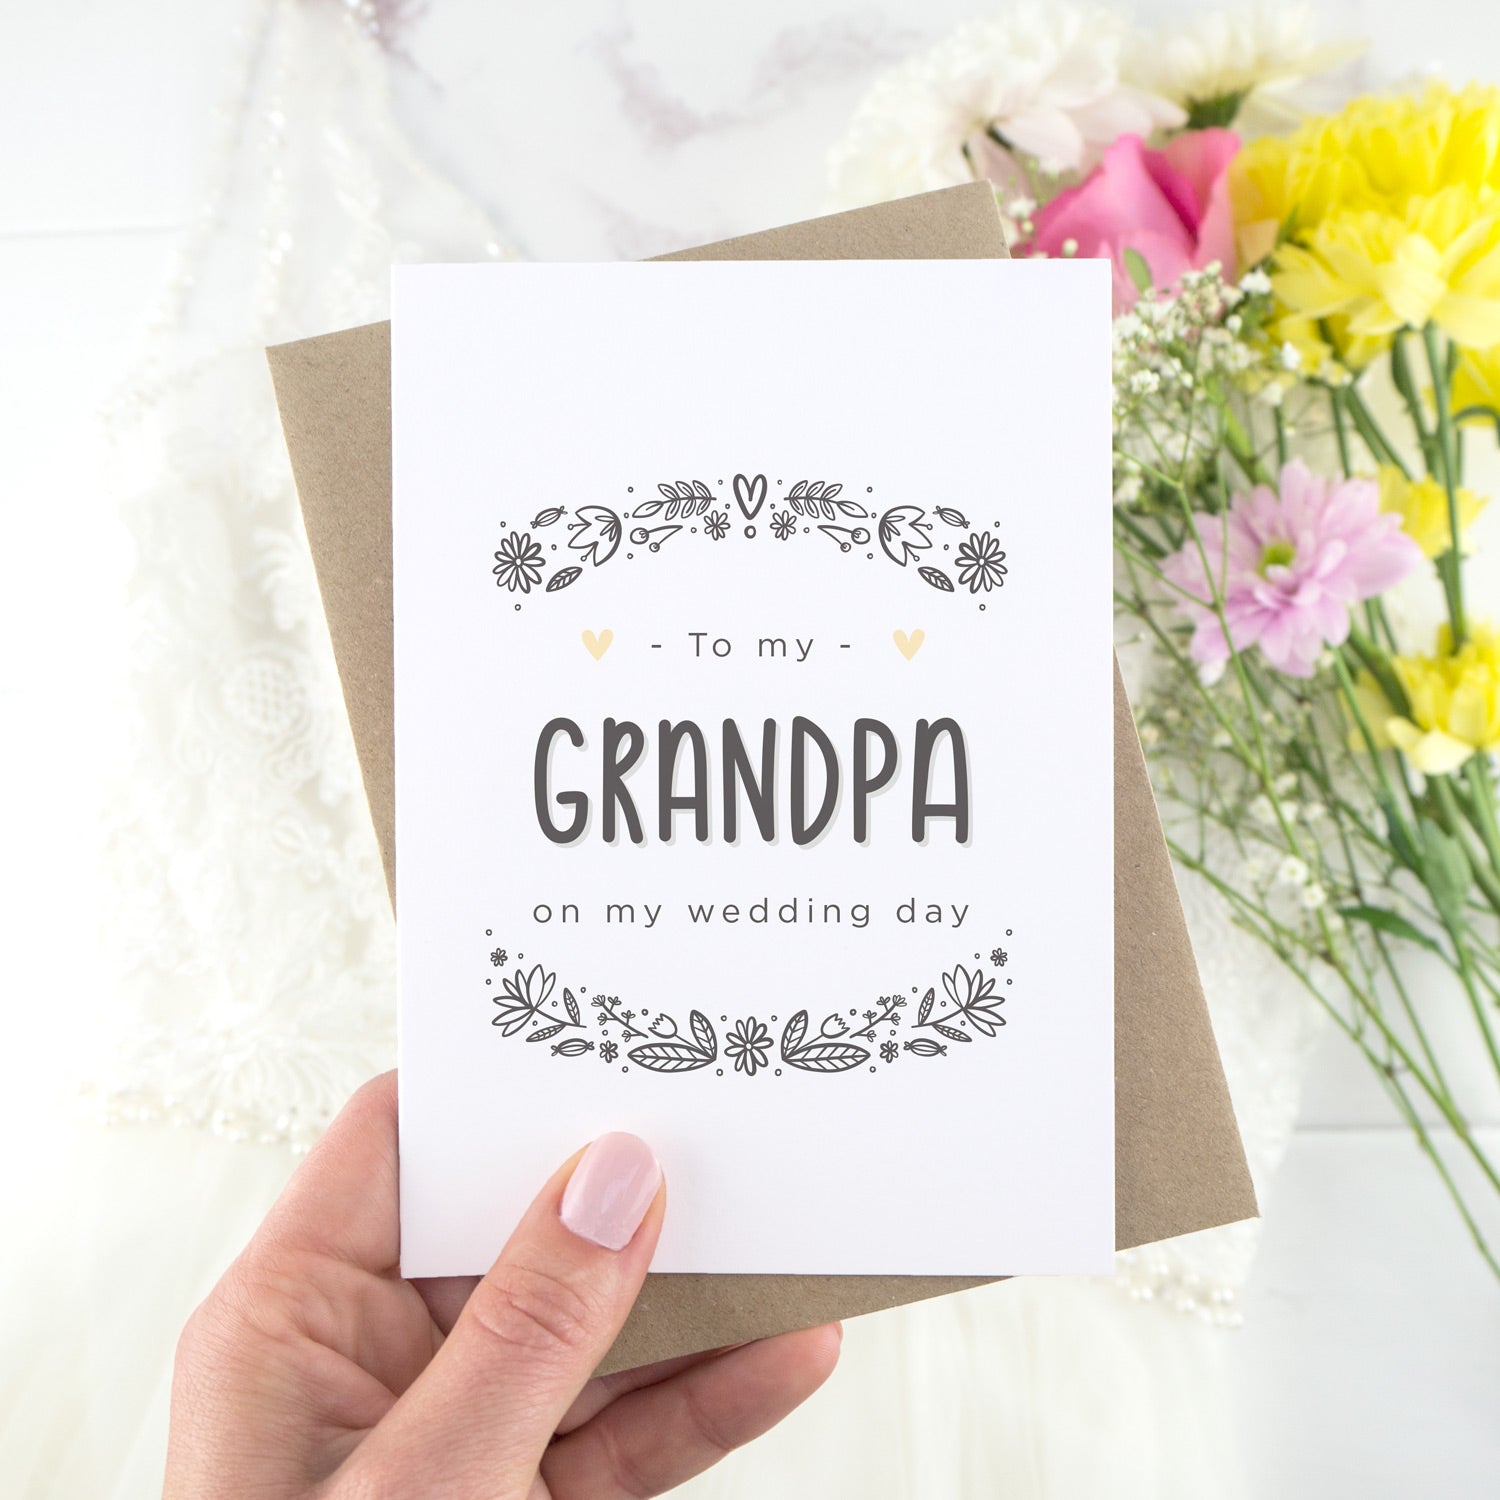 To my grandpa on my wedding day. A white card with grey hand drawn lettering, and a grey floral border. The image features a wedding dress and bouquet of flowers.